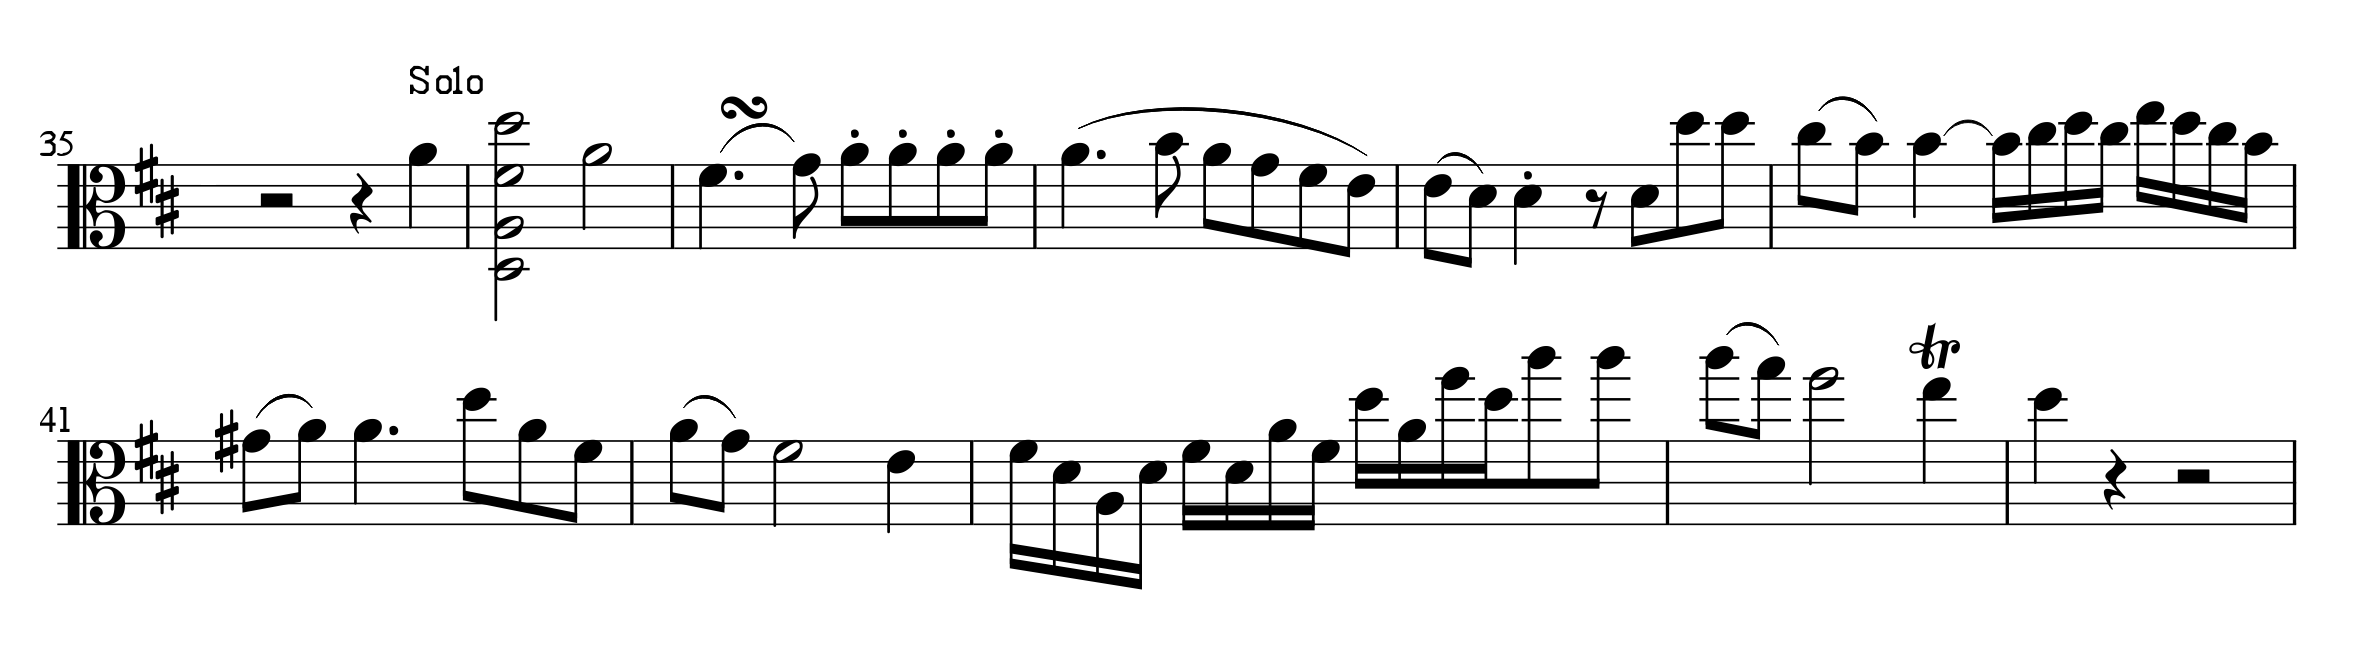 File:Hoffmeister 1mov 1st theme.png - Wikimedia Commons